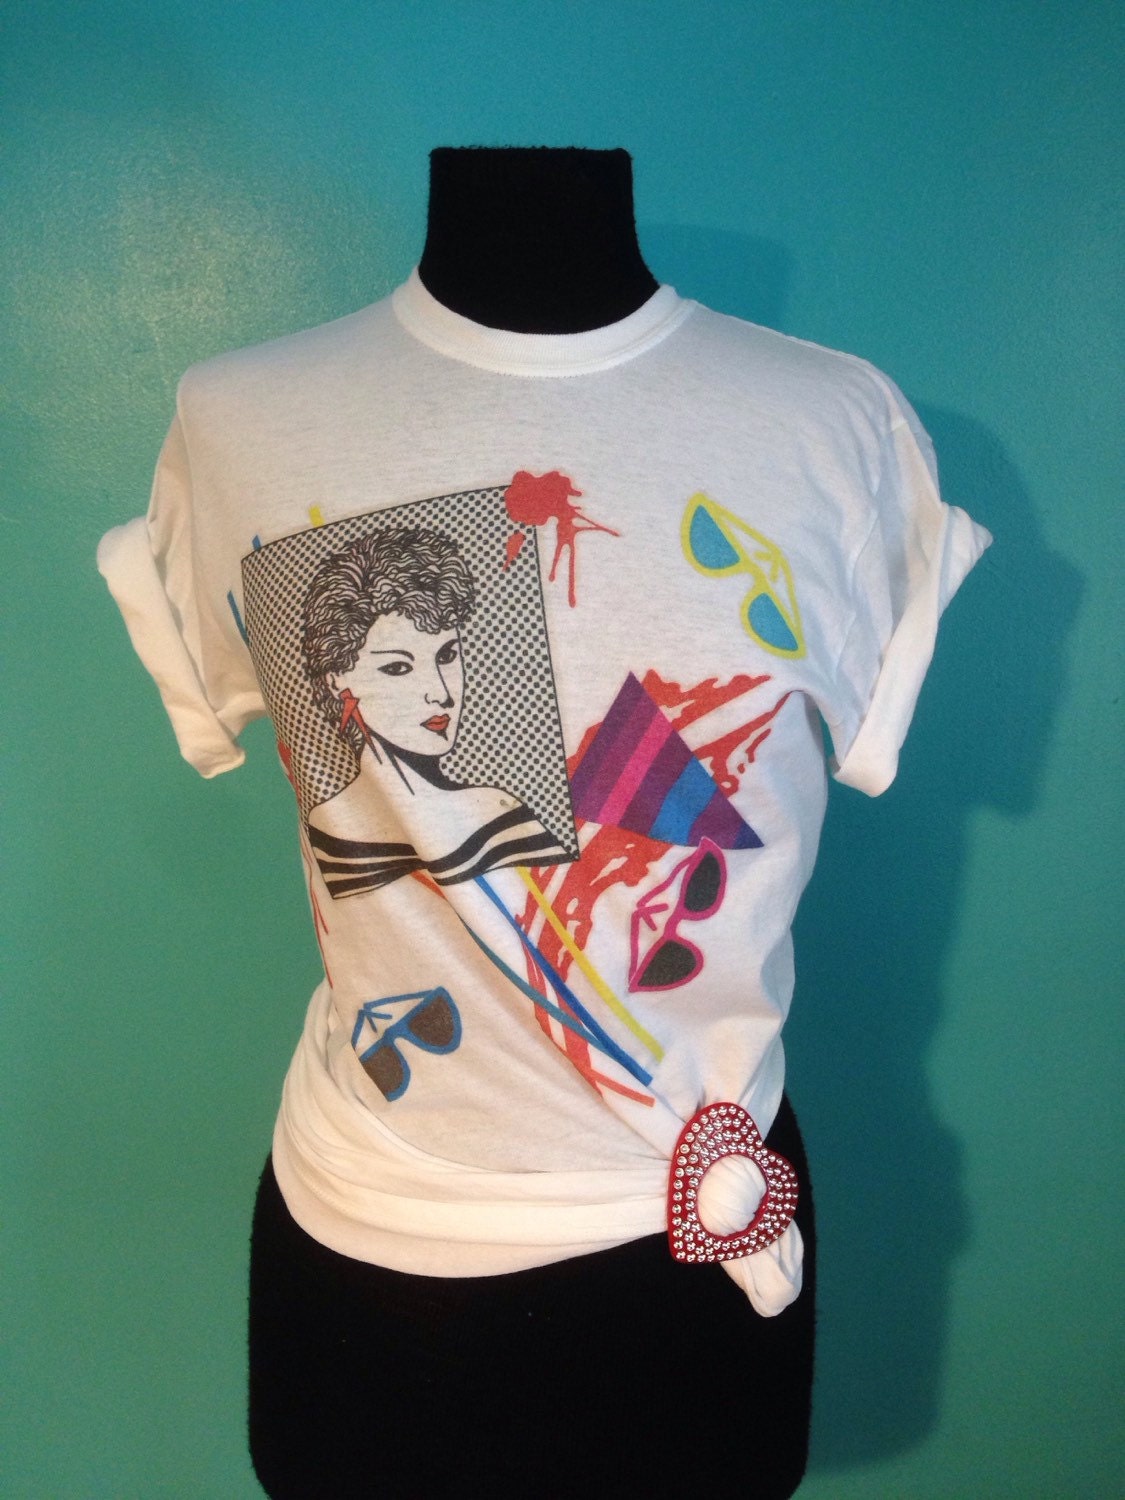 Vintage 1980s new wave Nagel style transfer on new T-shirt